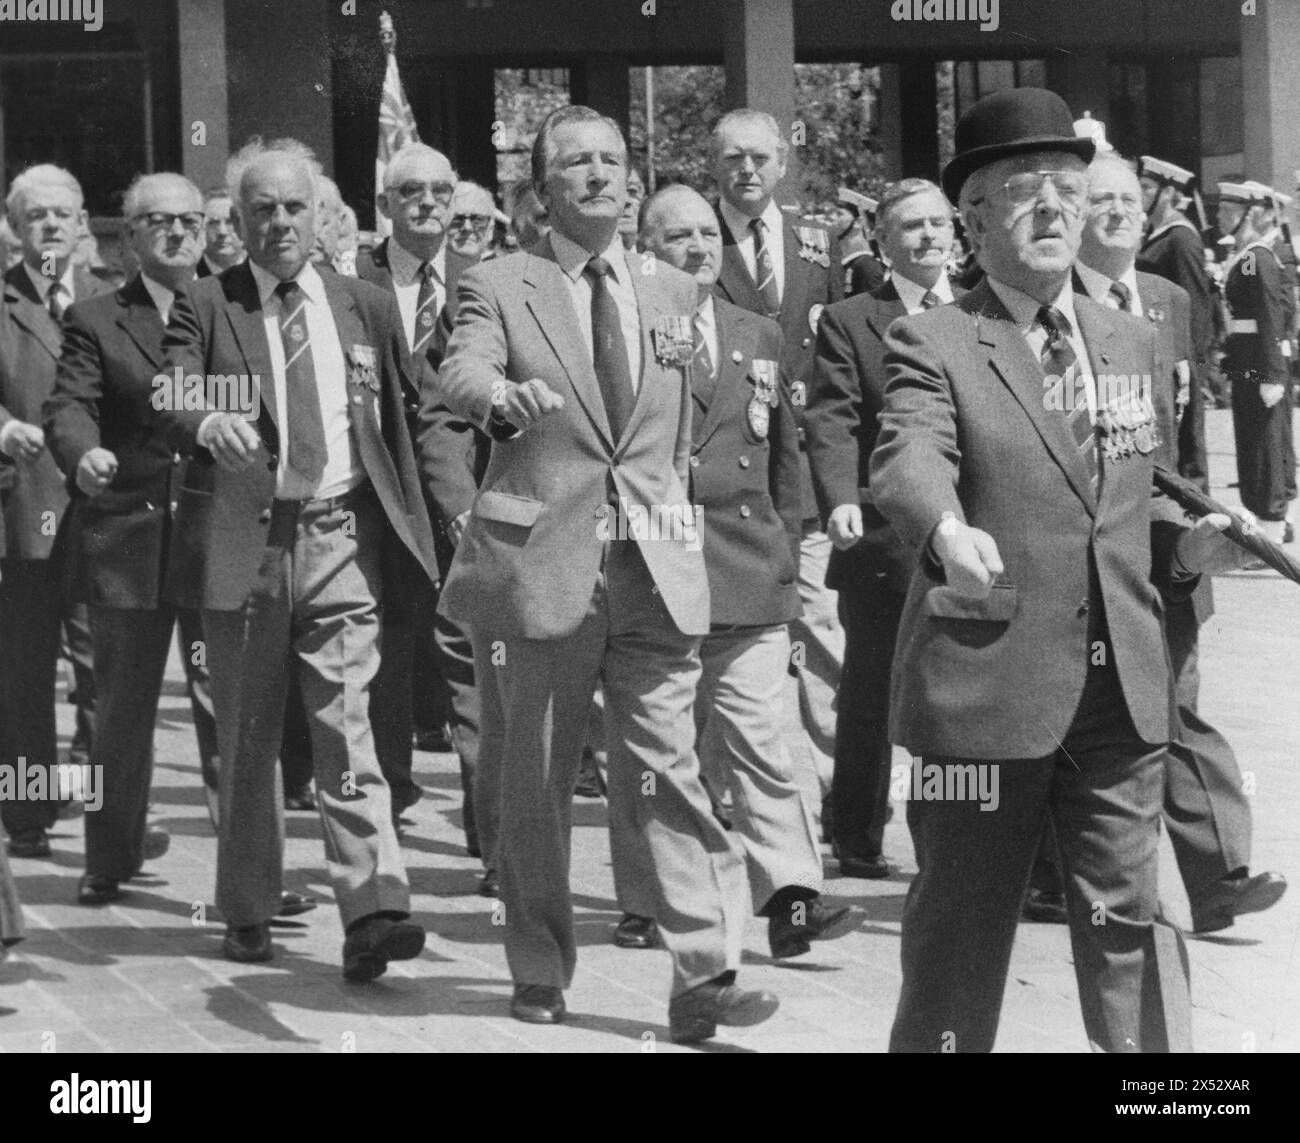 VETERANS MARK THE 4OTH ANNIVERSARY OF THE D.DAY NORMANDY LANDINGS DURING A PARADE IN PORTSMOUTH, 1984 PIC MIKE WALKER 1984 Stock Photo